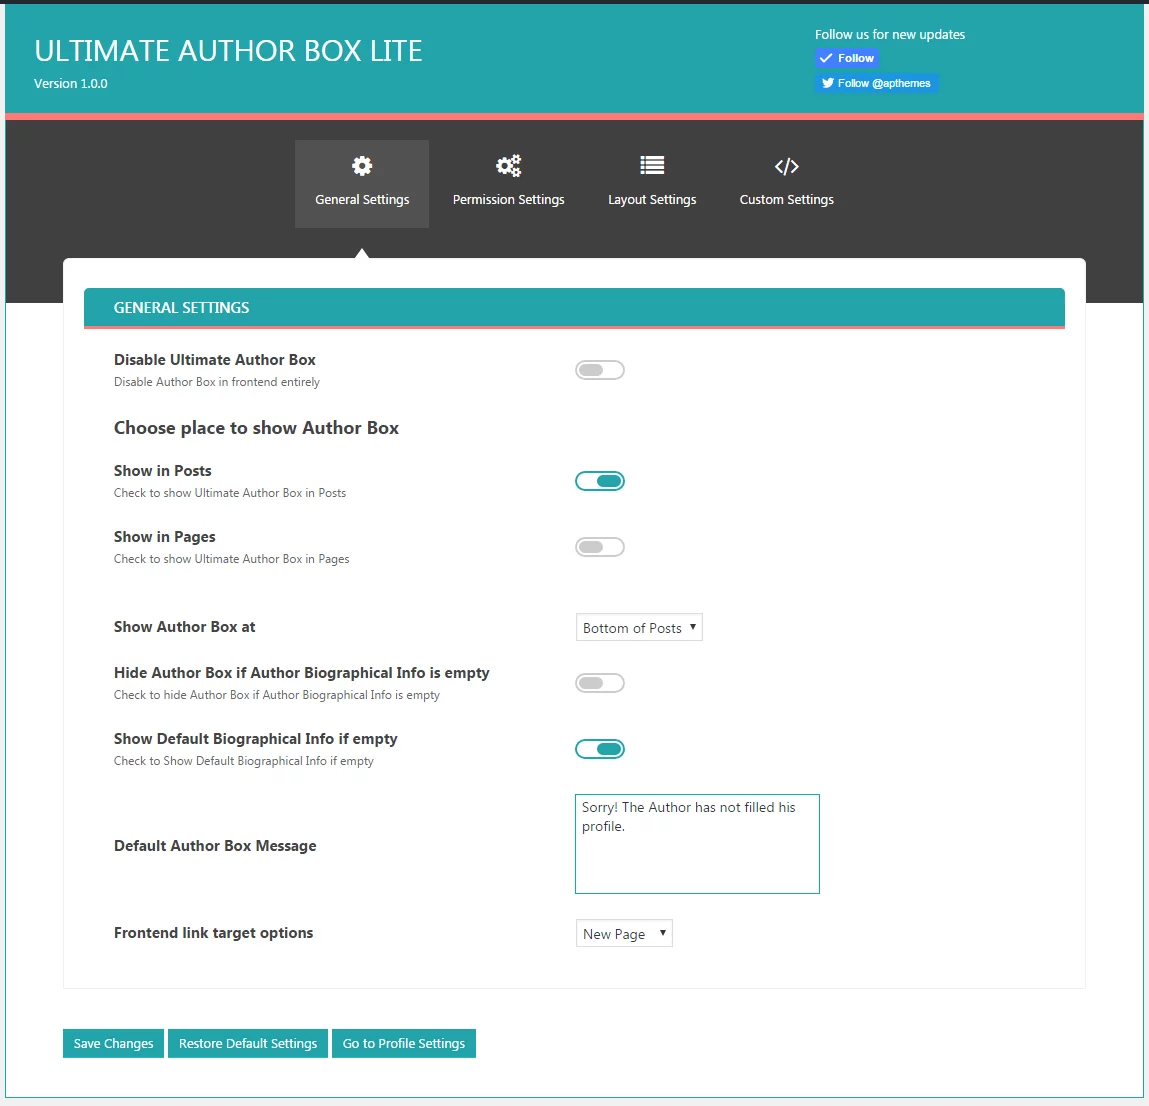 Ultimate Author Box Lite: General Settings Tabs